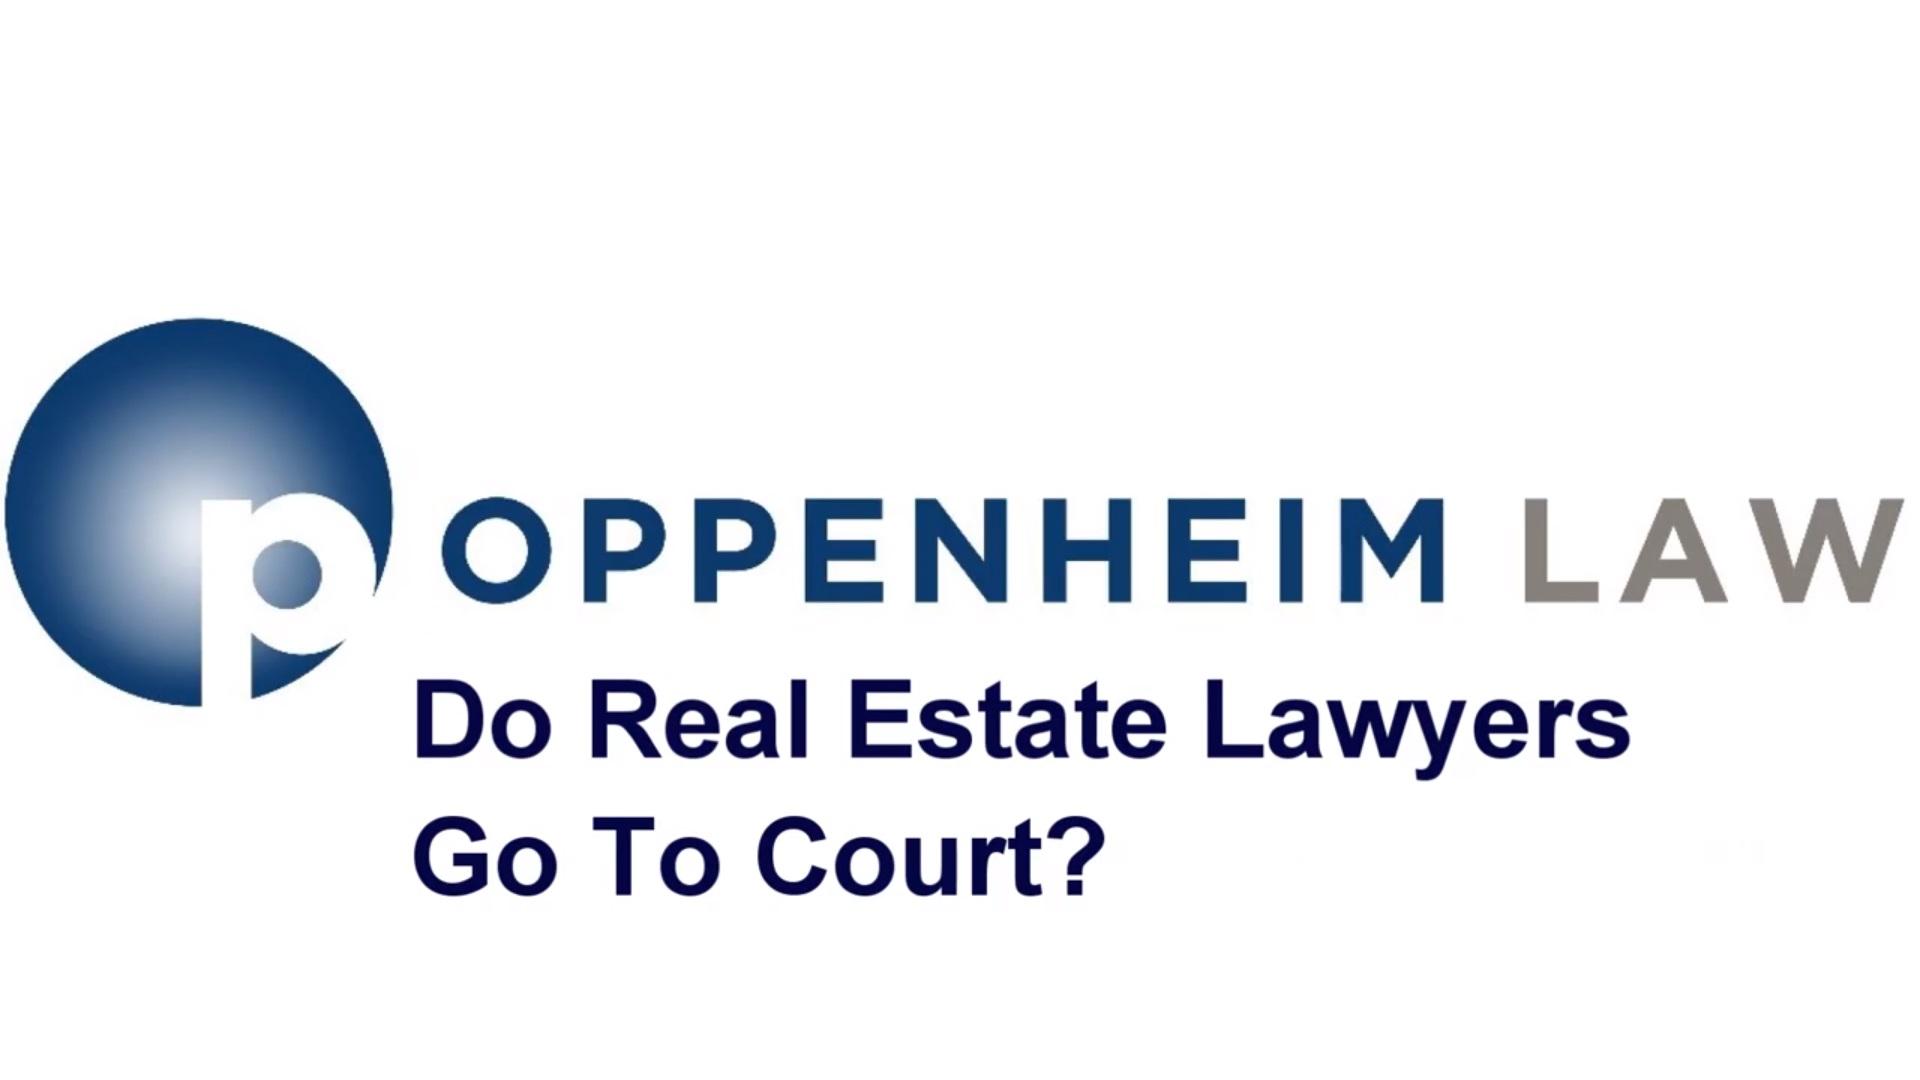 Do Real Estate Lawyers Go To Court?